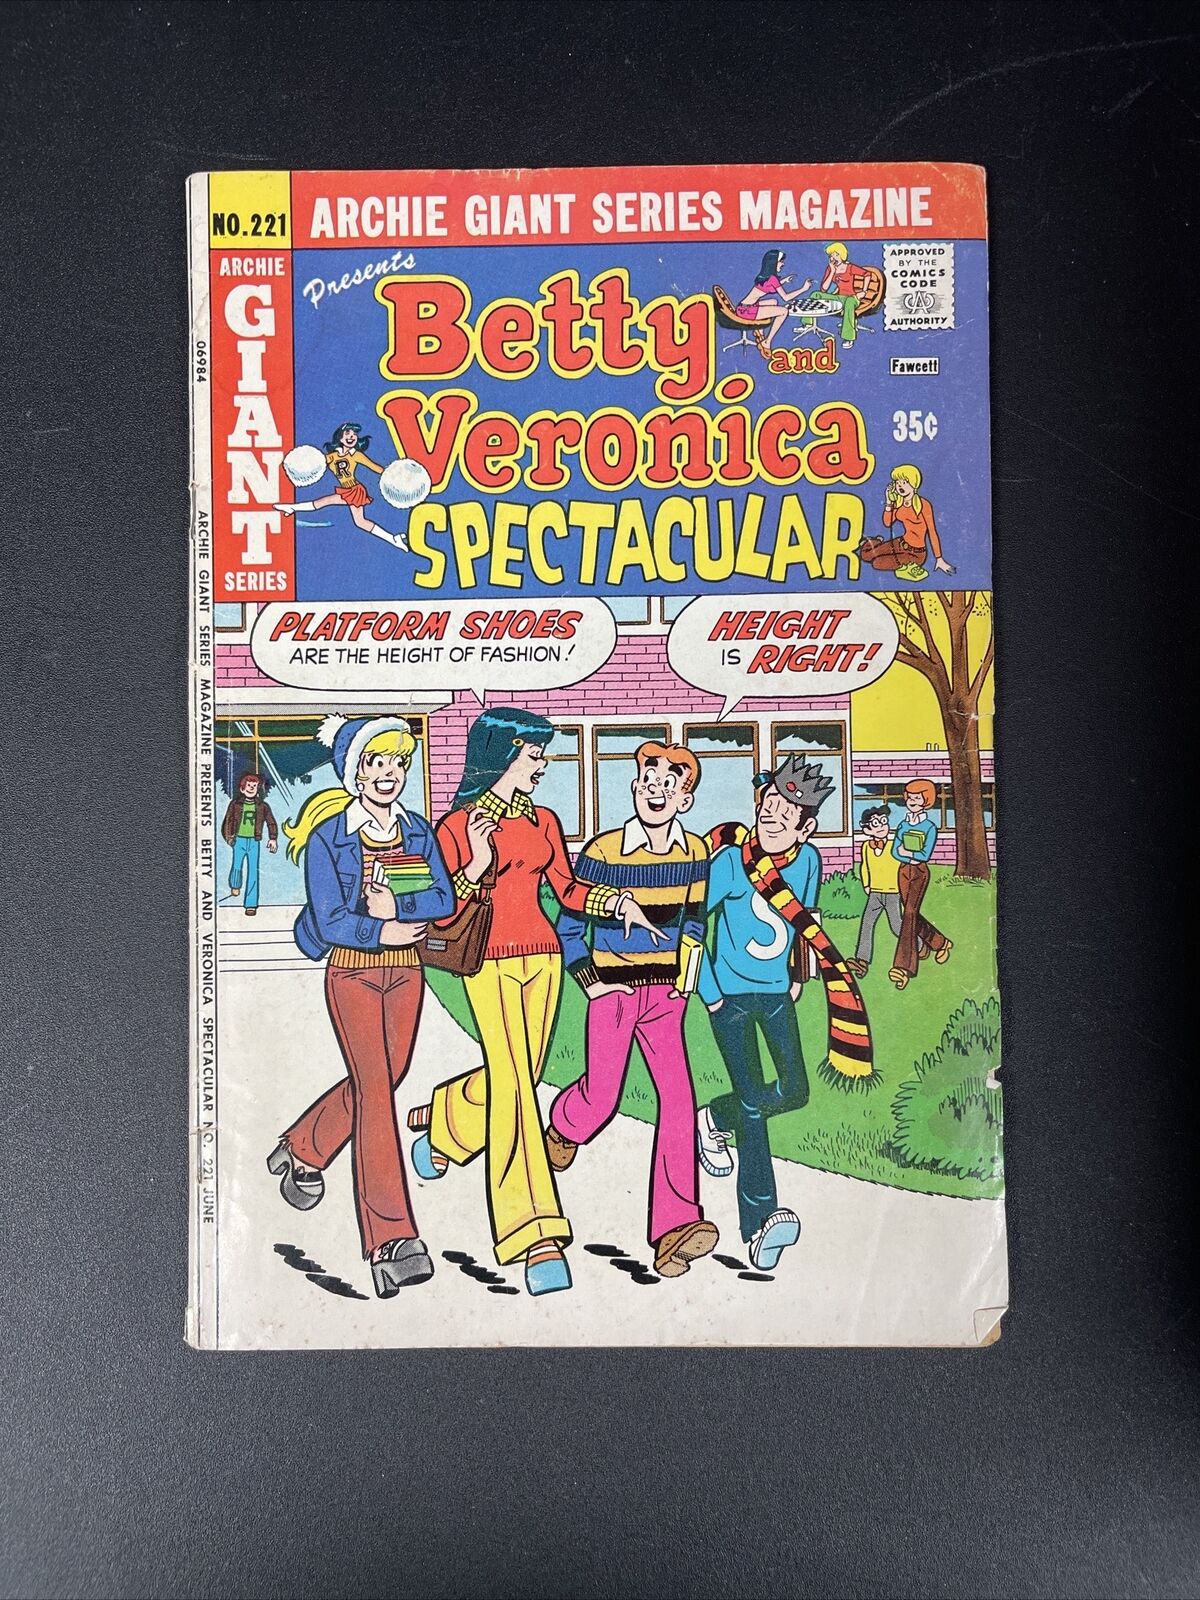 Archie Giant Series - Betty and Veronica Spectacular #221 (1974) Fine Condition